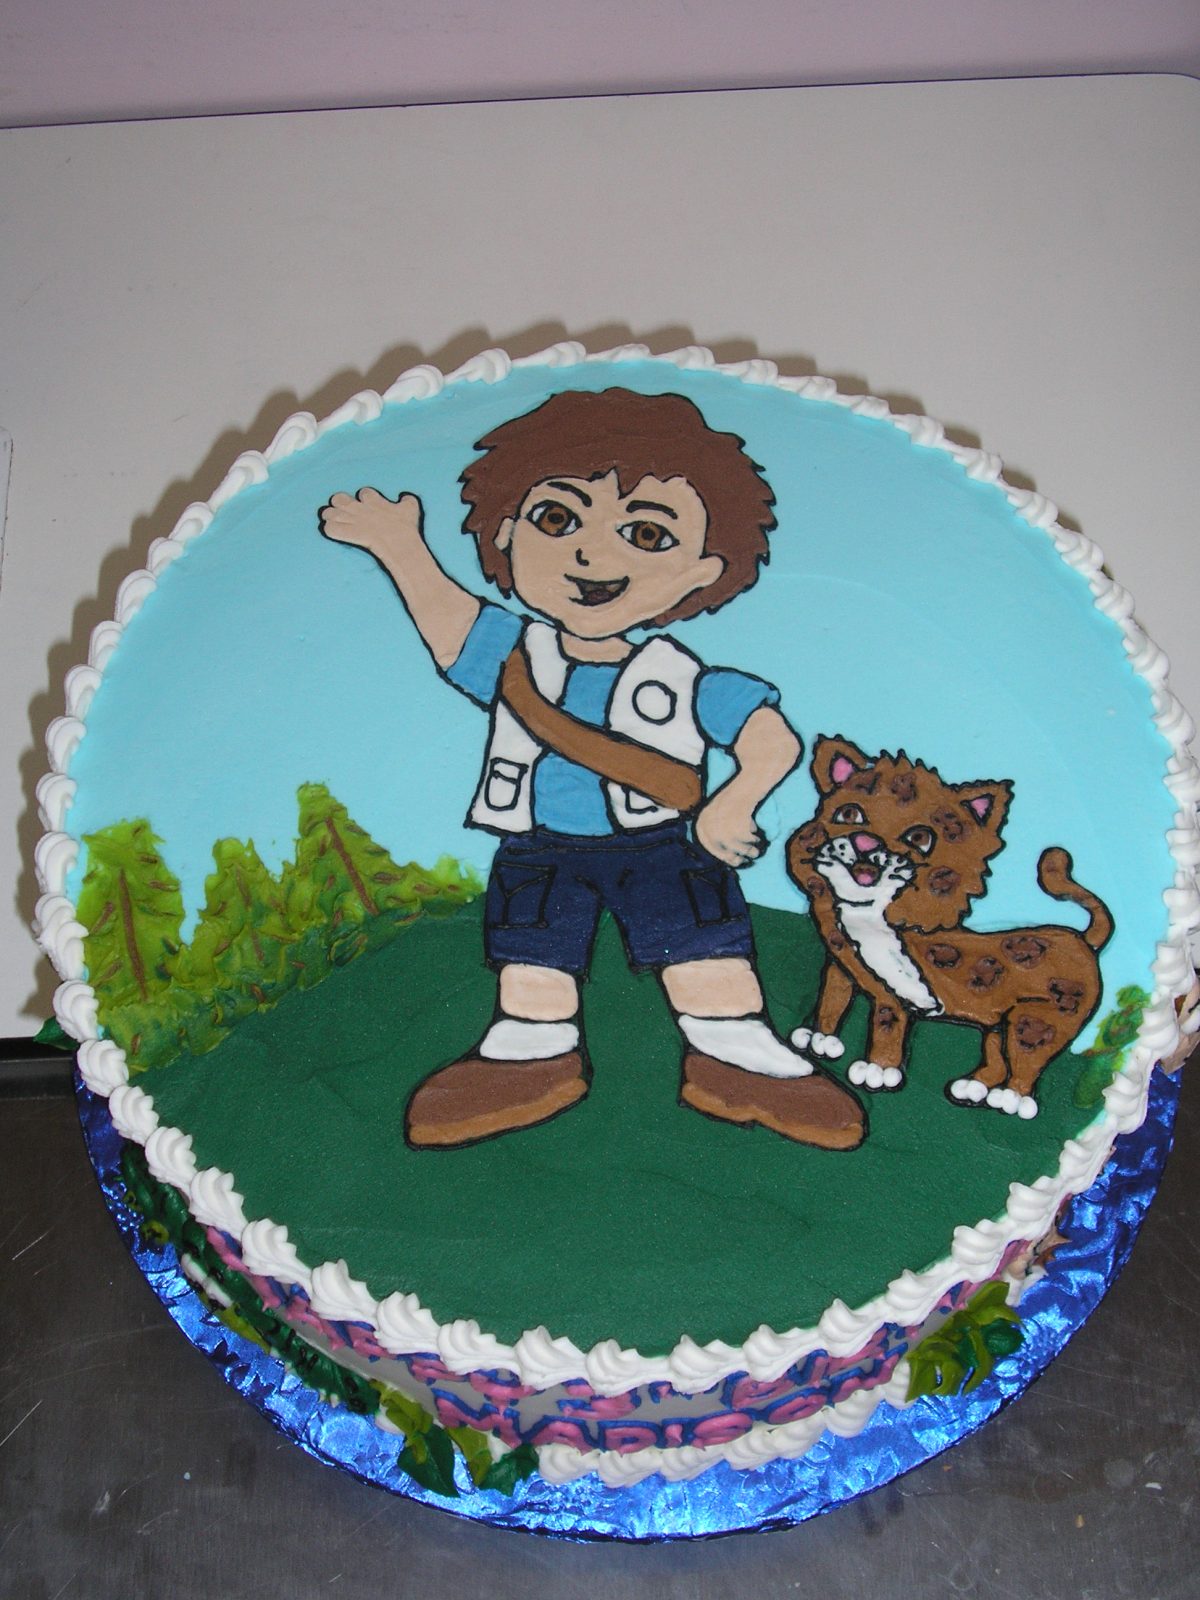 icing drawing of diego on cake